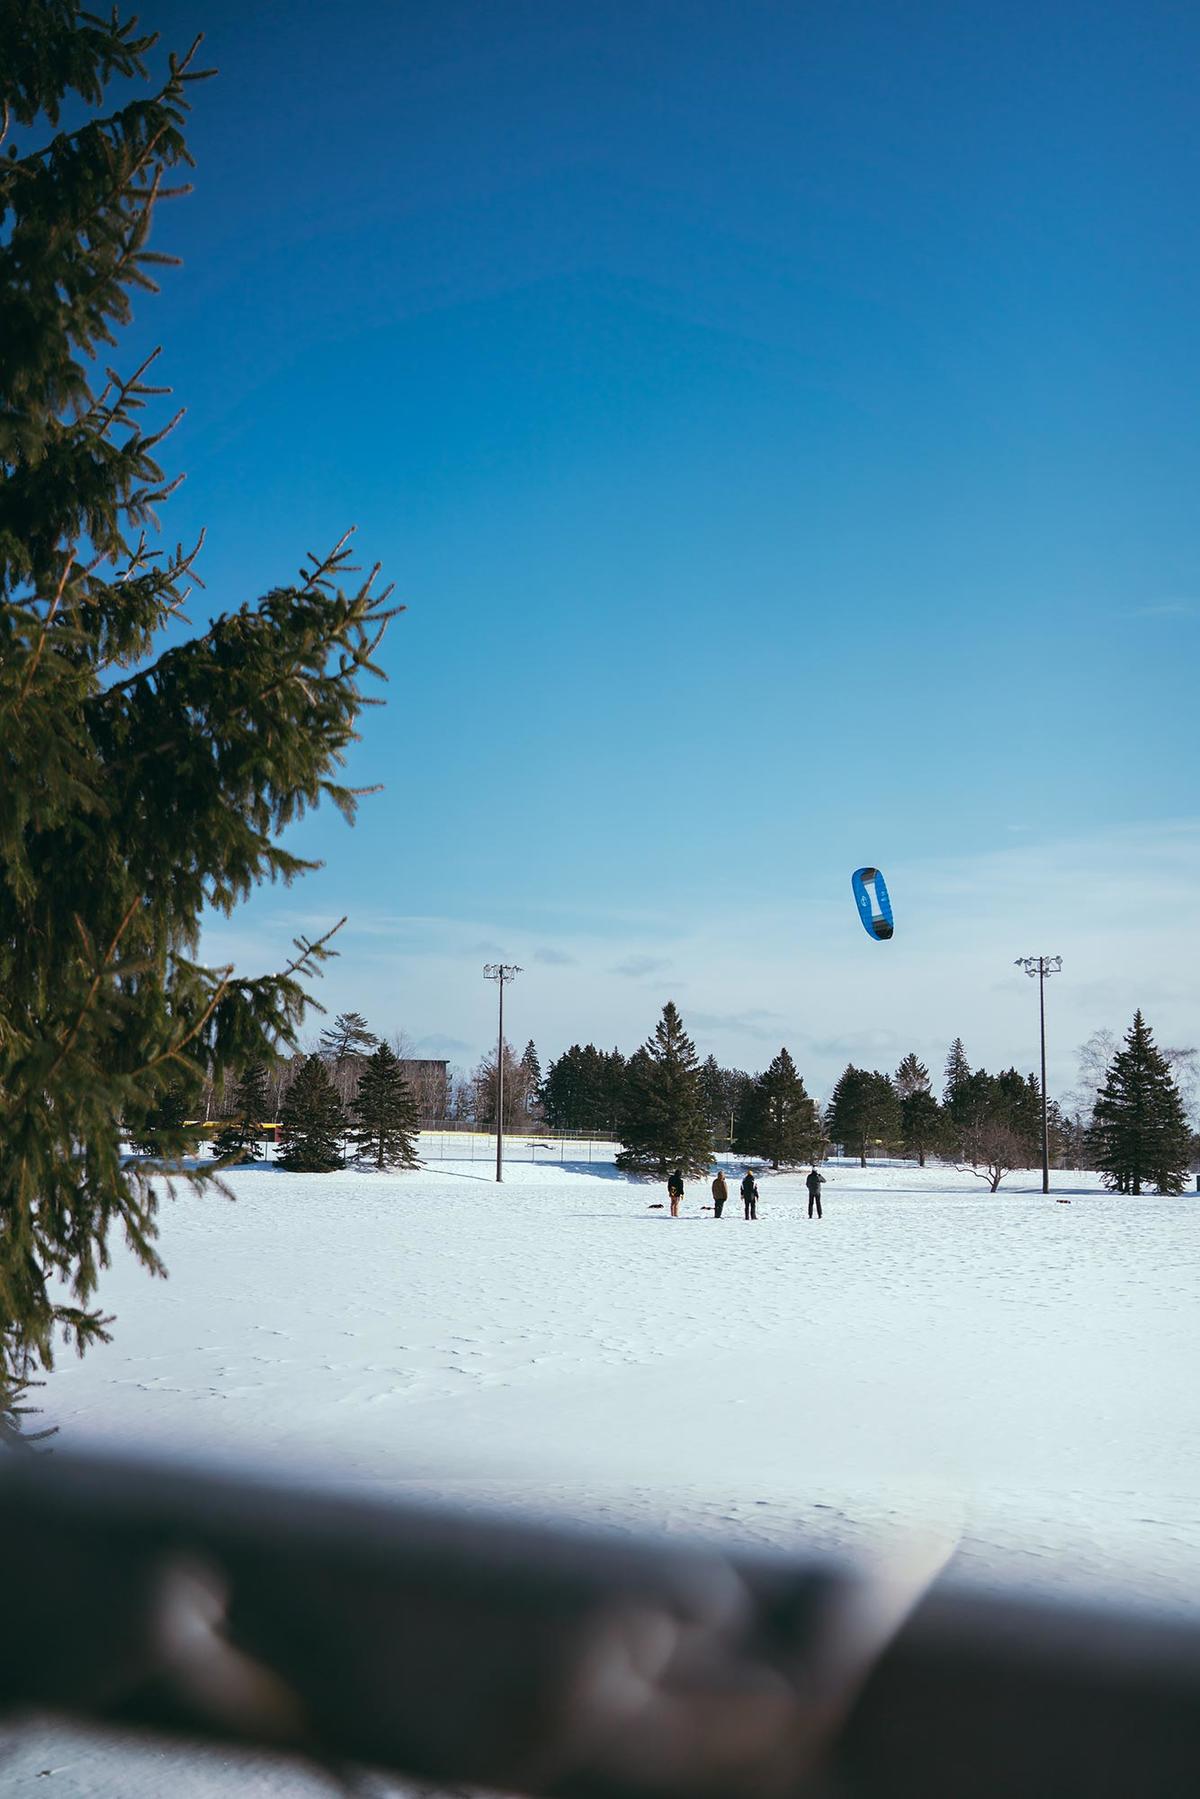 Students work with instructor Randy Carlson to learn snowkiting on the University of Minnesota Duluth campus.